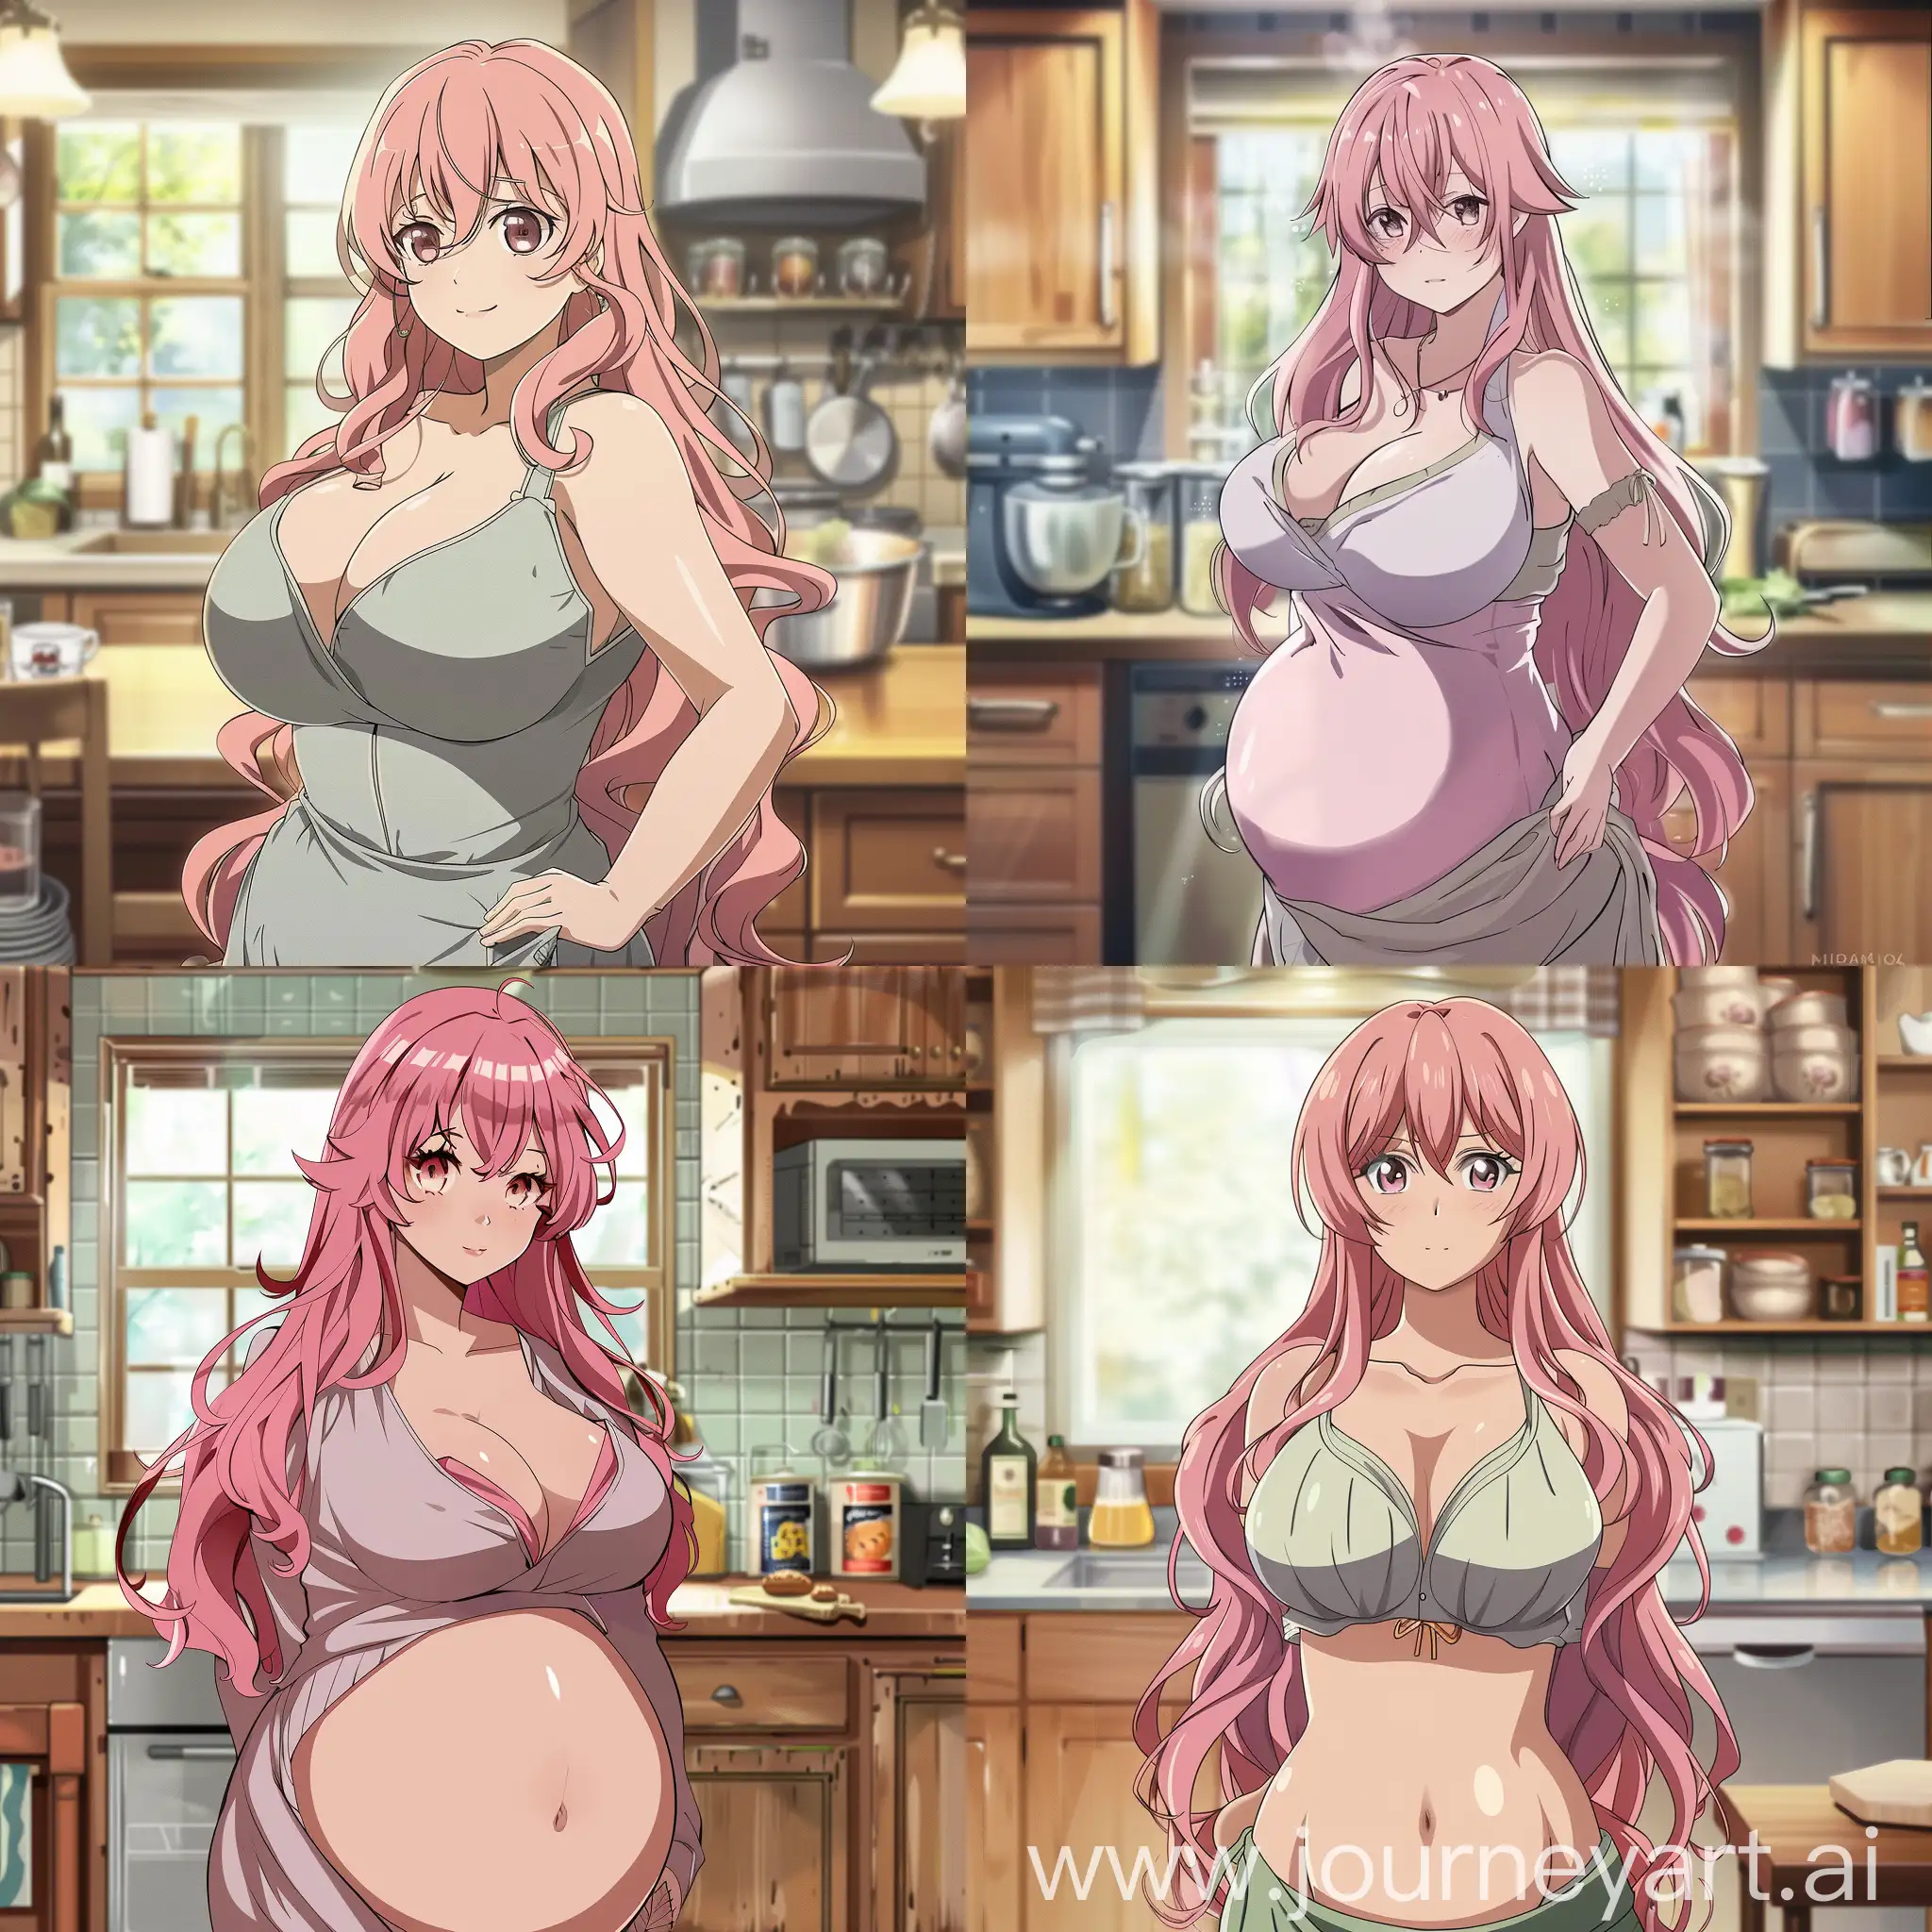 Anime-Style-Mother-Figure-with-Pink-Hair-in-Kitchen-Setting